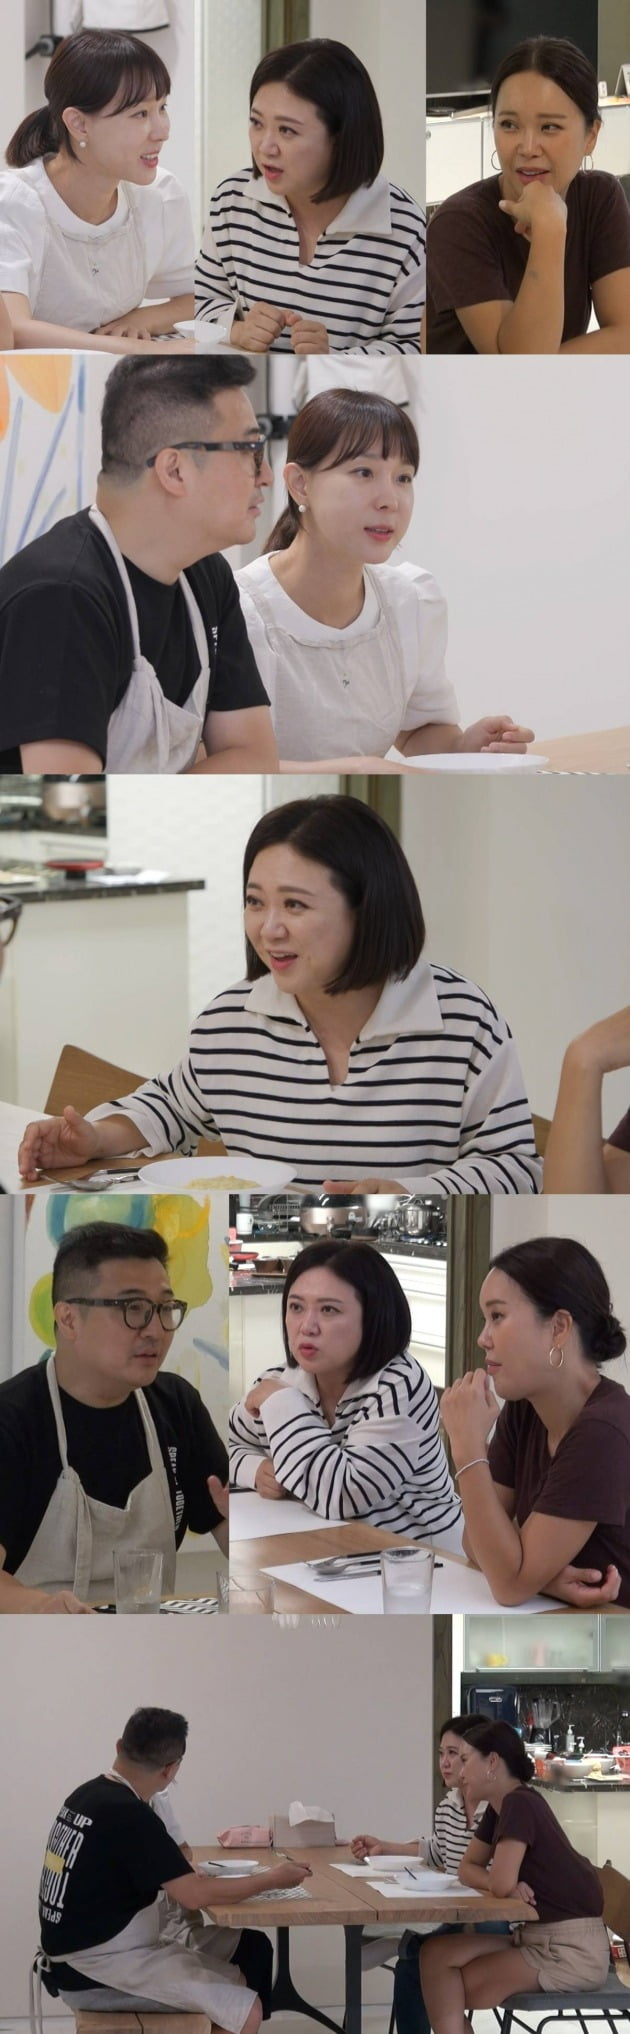 Gag Woman Kim Sook is the first to Confessions Love Story with Old Thumbnail.In the SBS entertainment Same Bed, Different Dreams 2: You Are My Dest - You Are My Destiny (hereinafter referred to as Same Bed, Different Dreams 2: You Are My Dest), which airs on 29th, Lee Ji-hye, Moon Jea-wans new home and Lee Ji-hyes best friend, Baek Ji- The housewarming scene with young, Kim Sook is revealed.Baek Ji-young and Kim Sook come to the house of Lee Ji-hye, Moon Jea-wan who recently moved, as the first housewarming guest.The first new house to be unveiled is a collection of Studios admiration with upgraded interiors such as brighter lighting and wider kitchens.Kim Sook, who looked around the house, said, Wisdom has succeeded.Especially, if the previous house was a neighbor with the national MC Yoo Jae-seok, this time Kang Ho-dong and actor Kim Hee-ae are surprised to find out that they are neighbors.The new home for top stars and neighbouring Lee Ji-hye and Moon Jea-wan will be unveiled on air.A rebellion of her husband Moon Jea-wan, who was only pure, takes place.While Lee Ji-hye was away for a while, Moon Jea-wan started his wifes back-to-back conversation with Baek Ji-young and Kim Sook.He starts with the words Its so hard to hear the nagging and pours out complaints about his wife.When Lee Ji-hye, who confirmed it in Studios, said, Is not it a turn-on? Studios MCs defended Moon Jea-wan, such as What is it if you can not do that? And My husband should breathe.I wonder what the whole Moon Jea-wan rebellion case will be.Kim Sook, who has been talking about his love story for the time being, first Confessions Love Story with the old Thumbnail.Kim Sook said, Humor code is important when I am in love. He then made an absurd anecdote with the old Thumbnail with the drama and the drama humor code.Kim Sook is a back door that he joked in a conversation with an older man who liked it, and said that he was immediately separated from the unexpected answer that came back.Kim Sooks funny Love Story, which ended in vain, can be found at Same Bed, Different Dreams 2: You Are My Dest, which is broadcasted at 10 pm on the 29th.